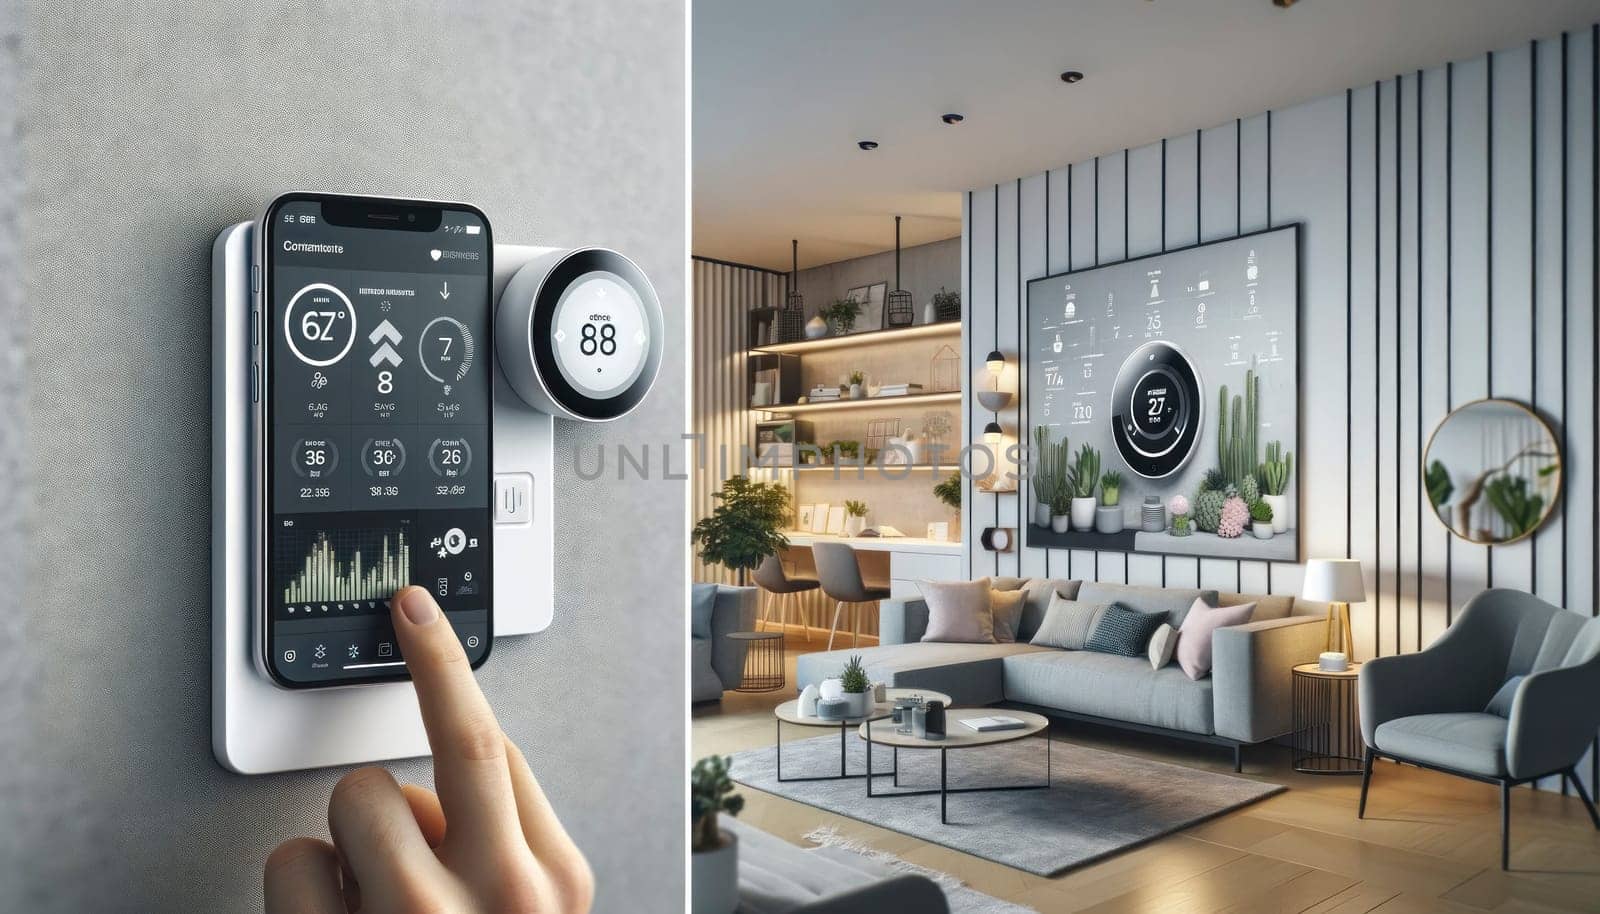 A person interacts with a smart home technology interface on their smartphone and wall-mounted devices in a modern living room.